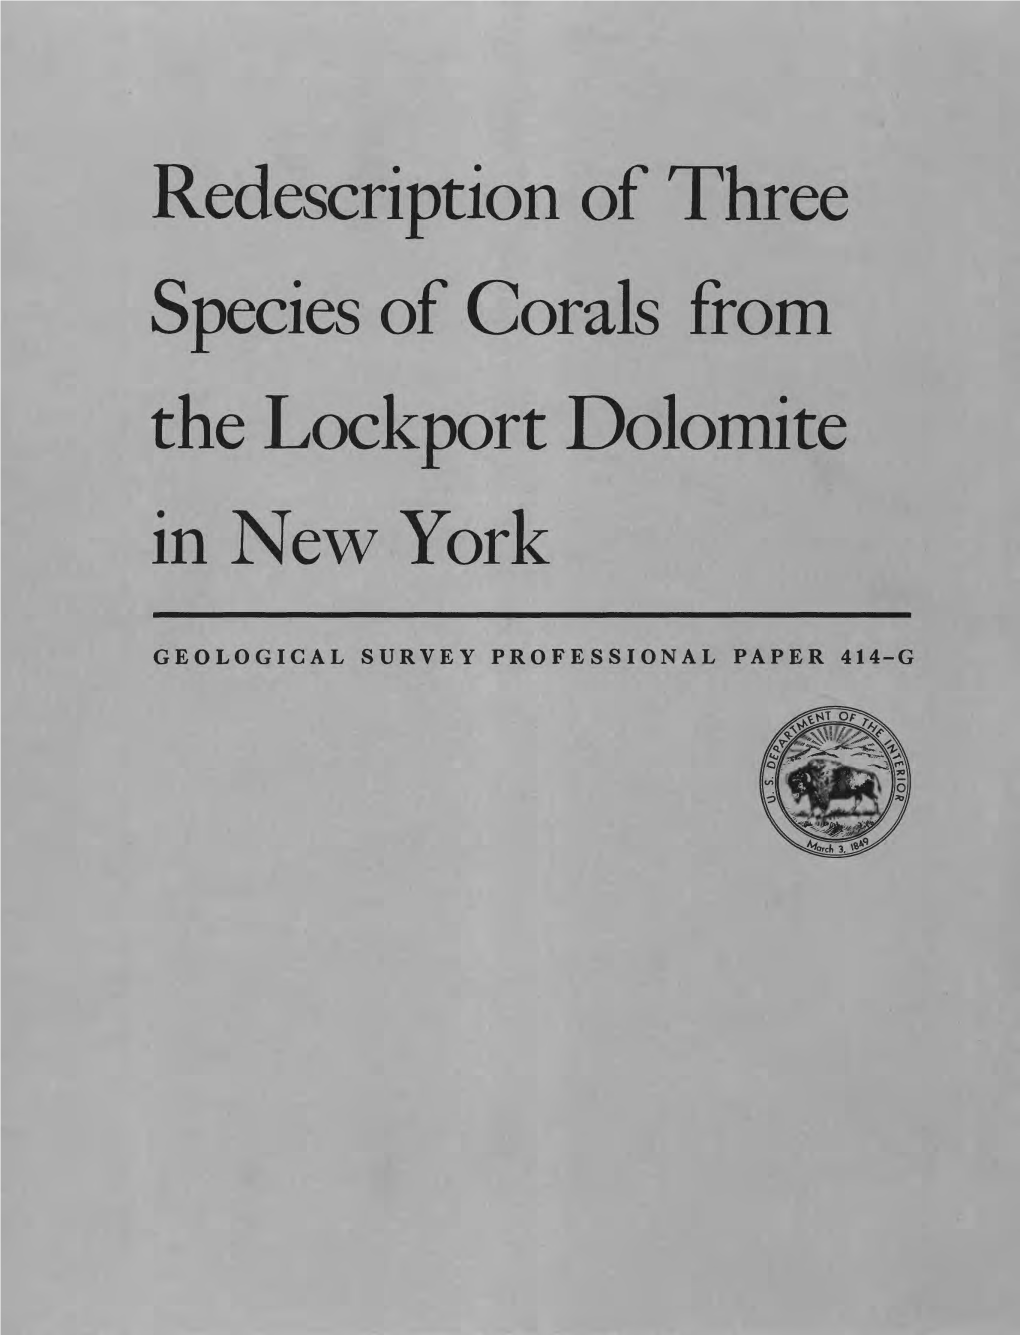 Redescription of Three Species of Corals from the Lockport Dolomite in New York